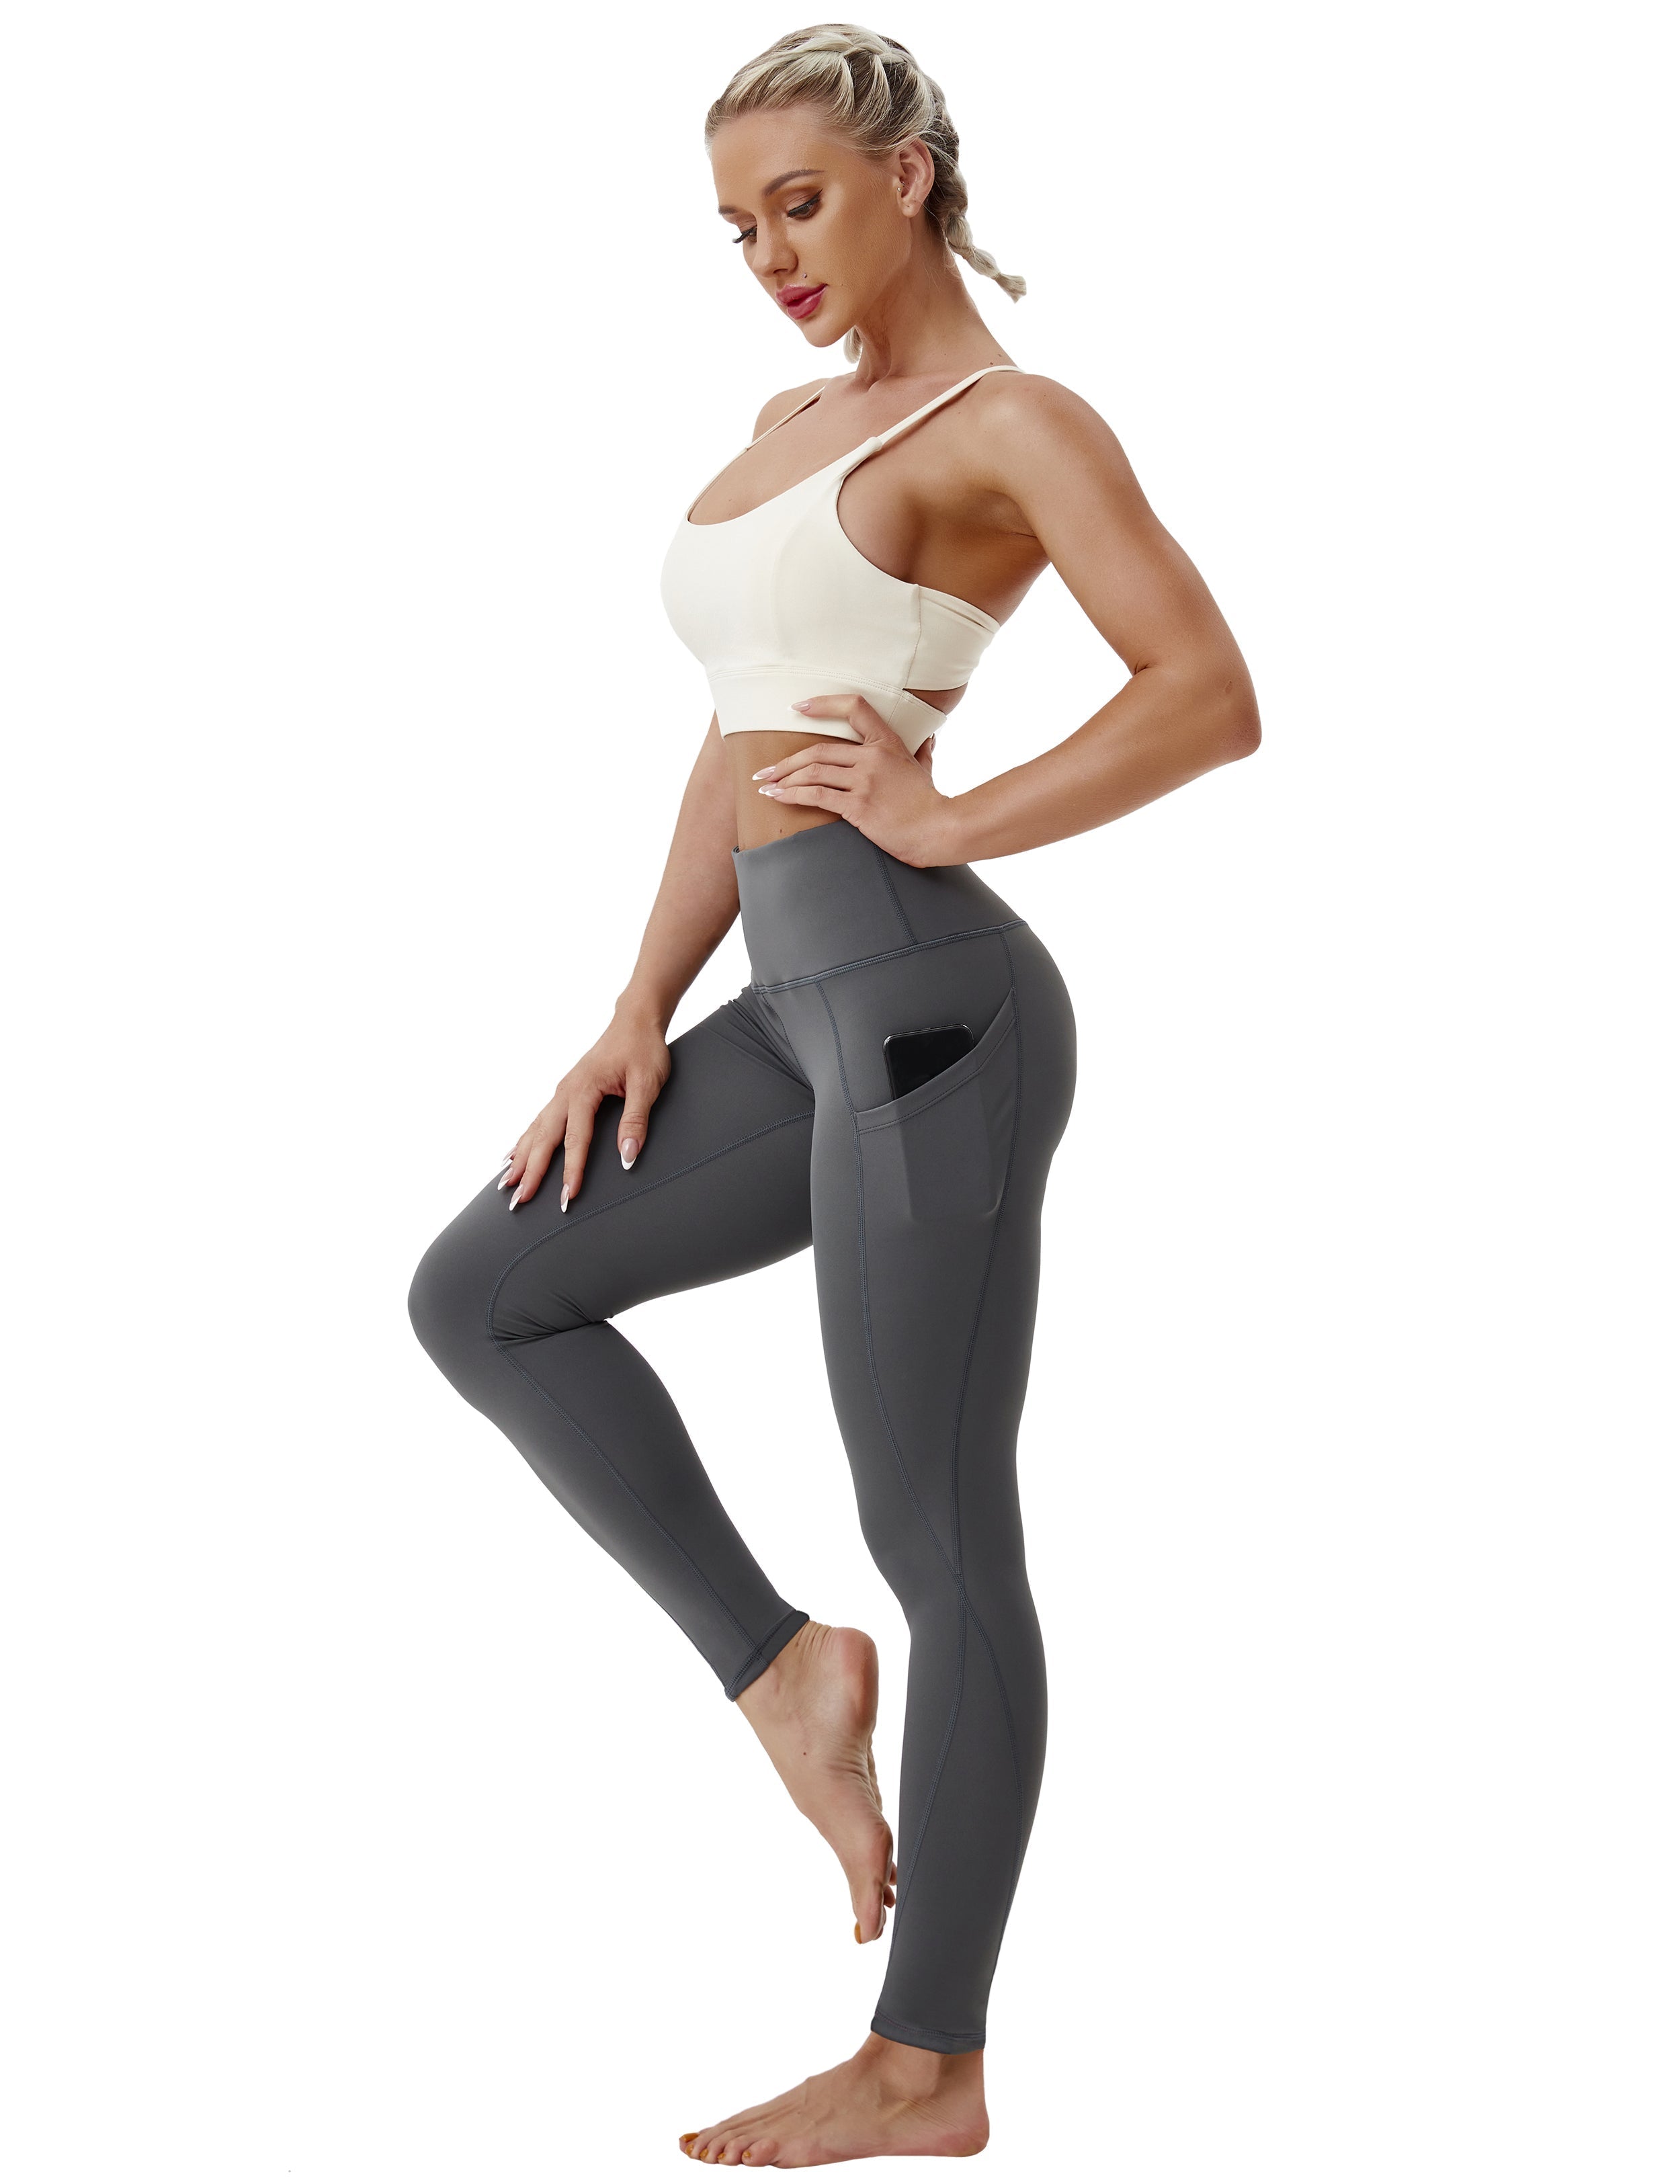 High Waist Side Pockets Plus Size Pants shadowcharcoal 75% Nylon, 25% Spandex Fabric doesn't attract lint easily 4-way stretch No see-through Moisture-wicking Tummy control Inner pocket